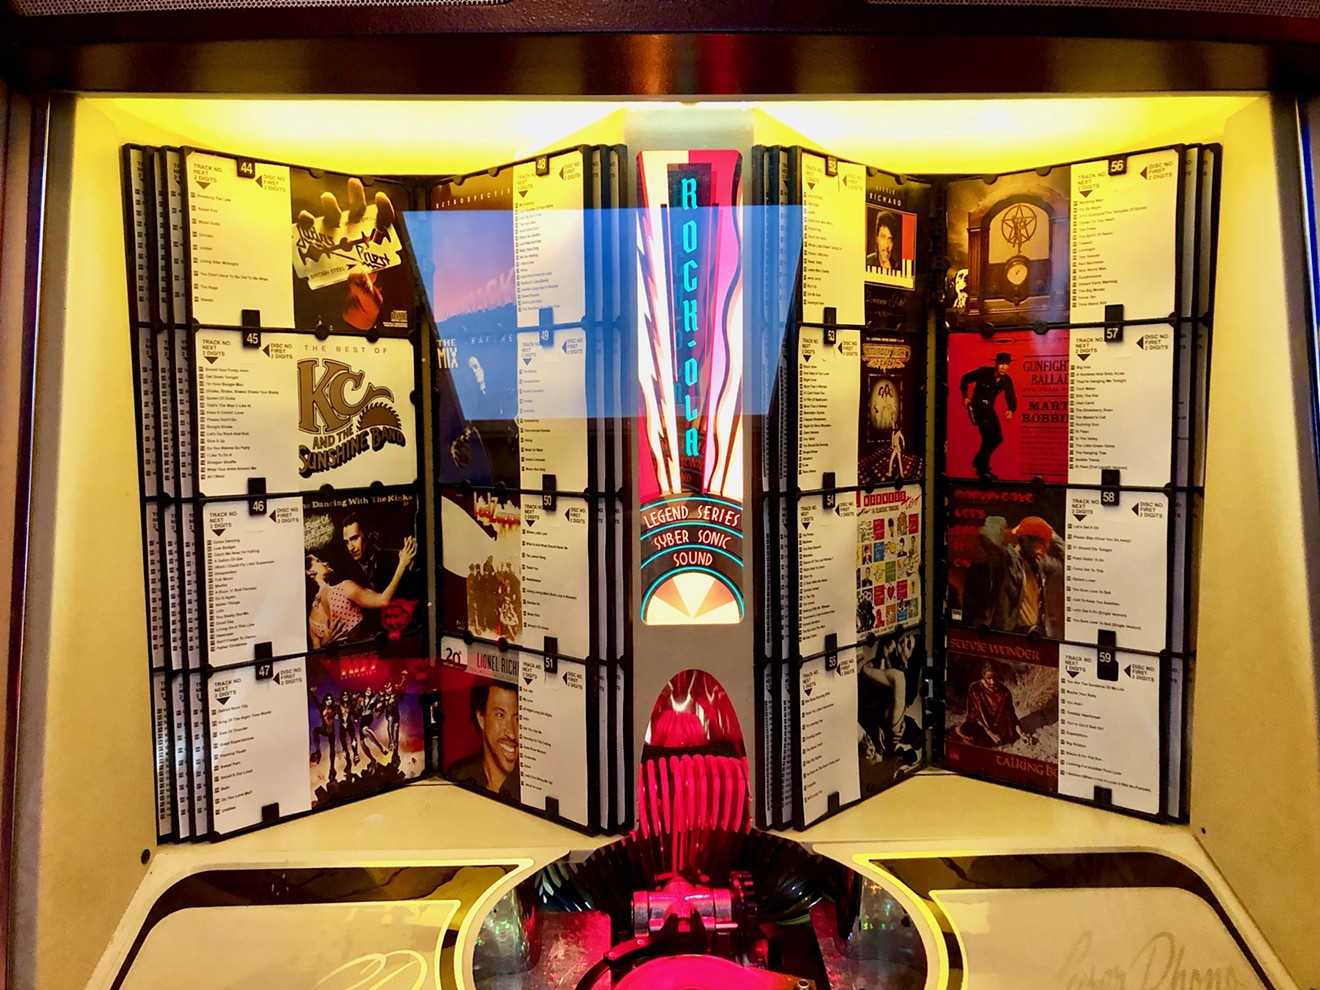 The Thunderbird Lounge jukebox with the never-leaving Marty Robbins album.